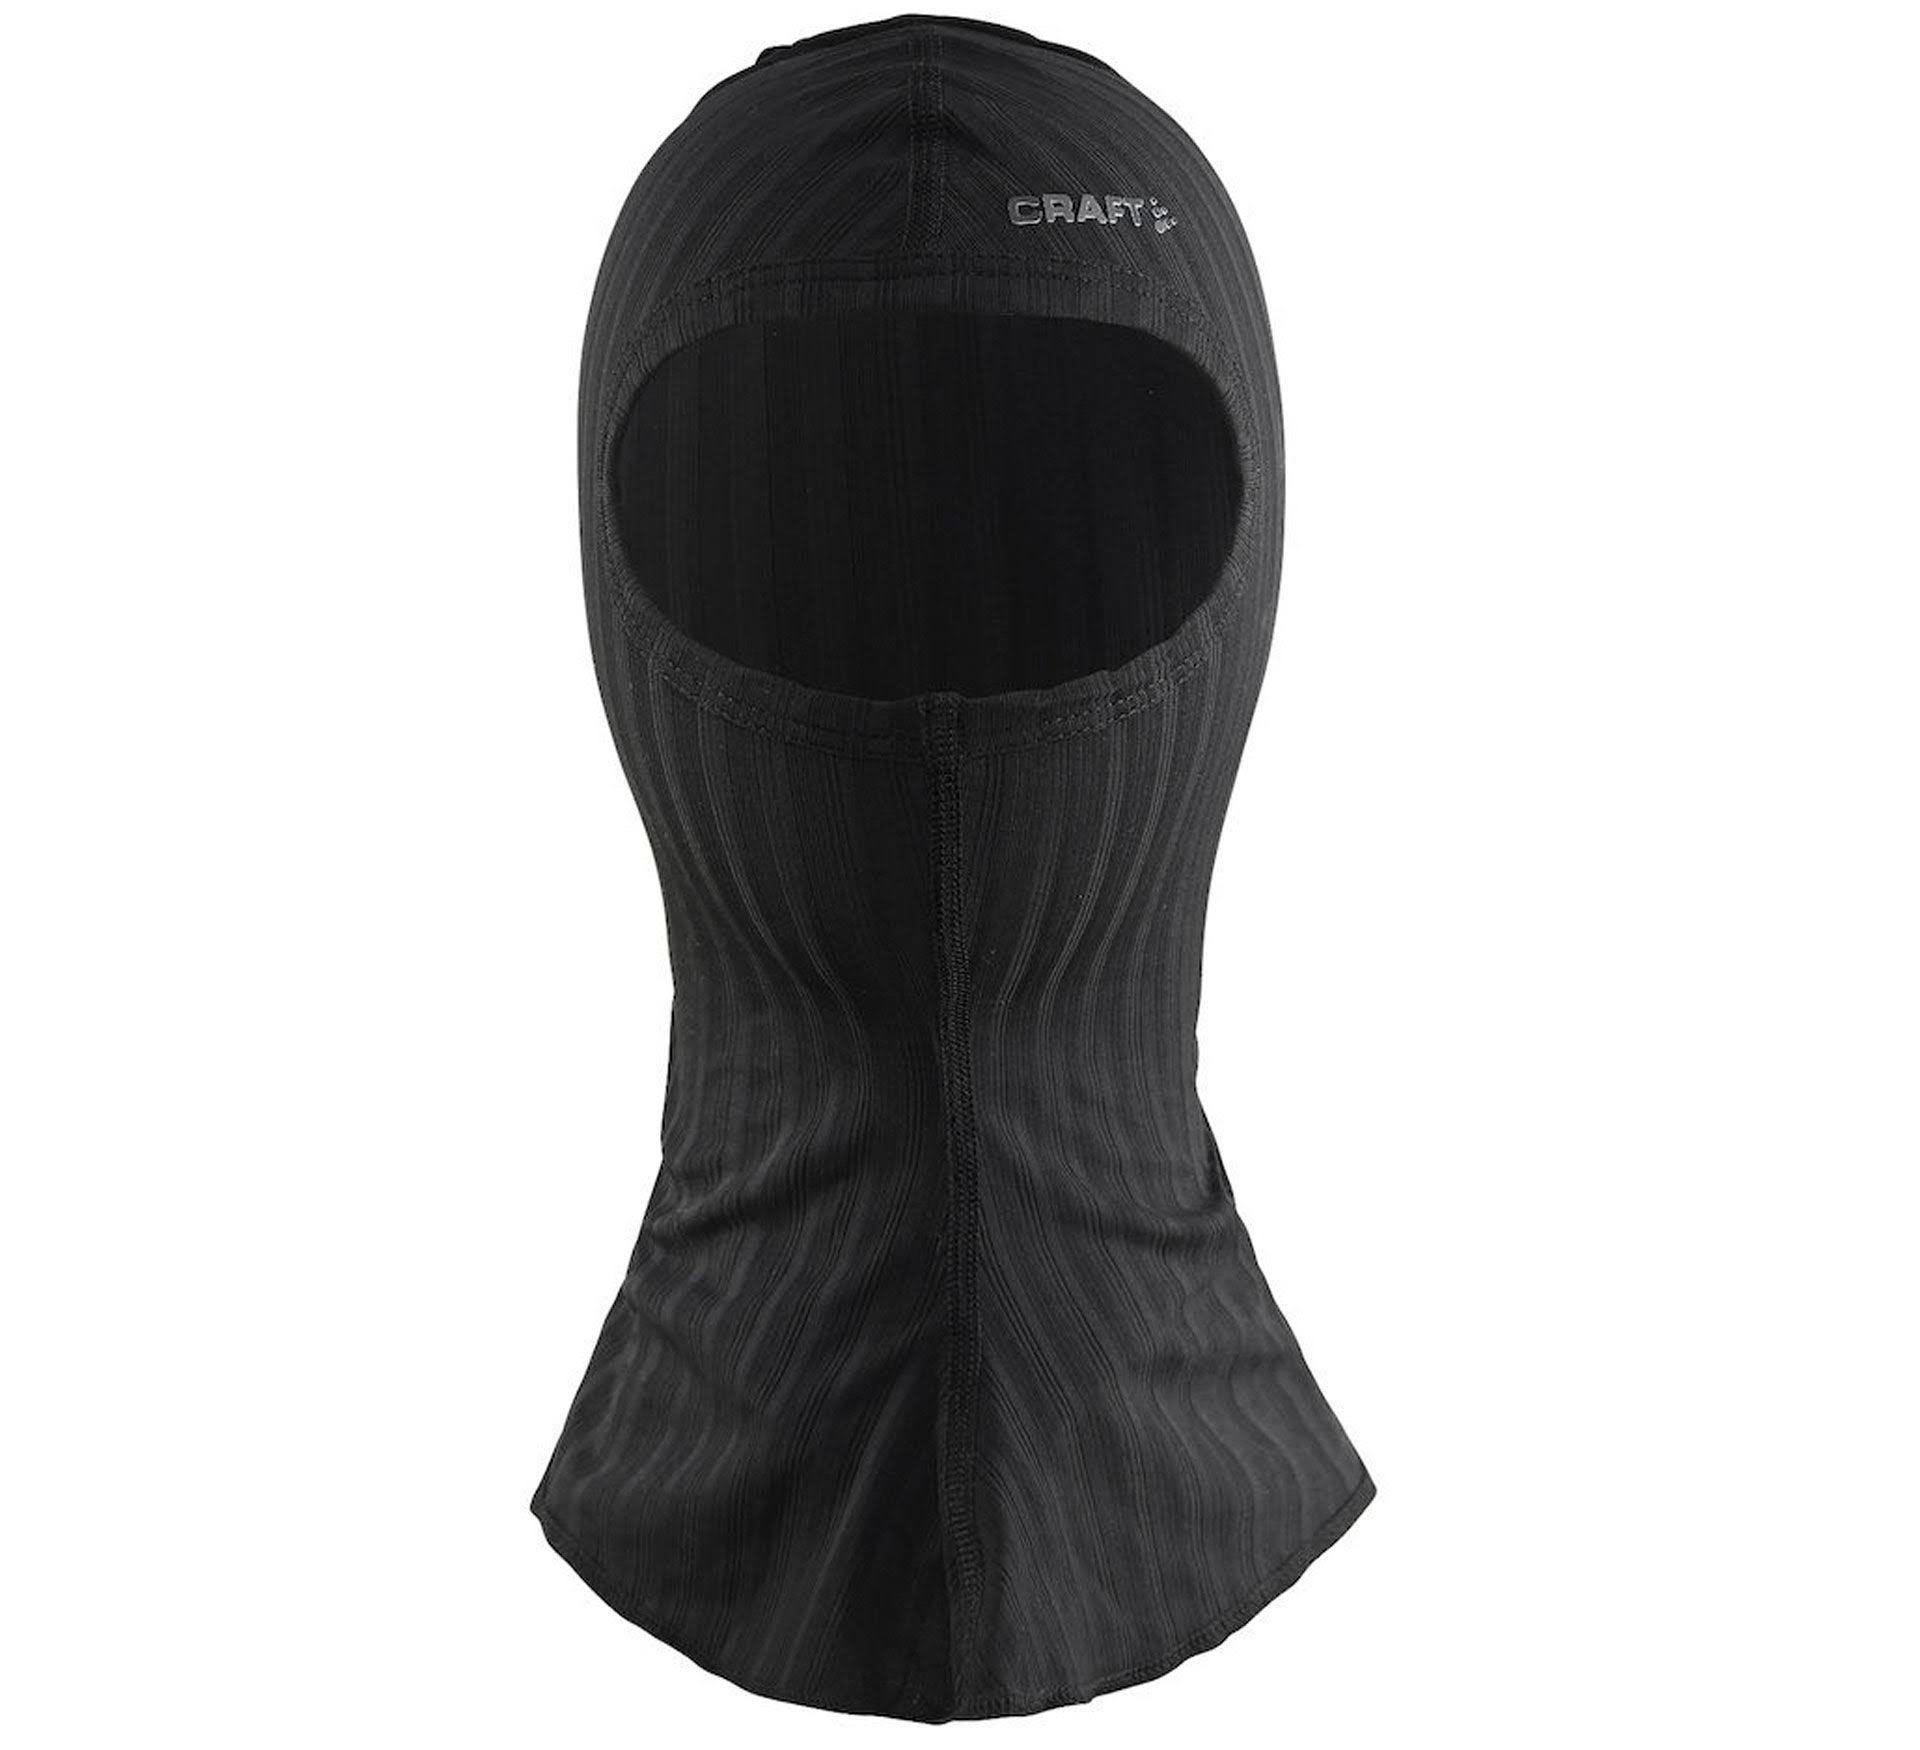 Craft Active Extreme 2.0 Face Protector - Black